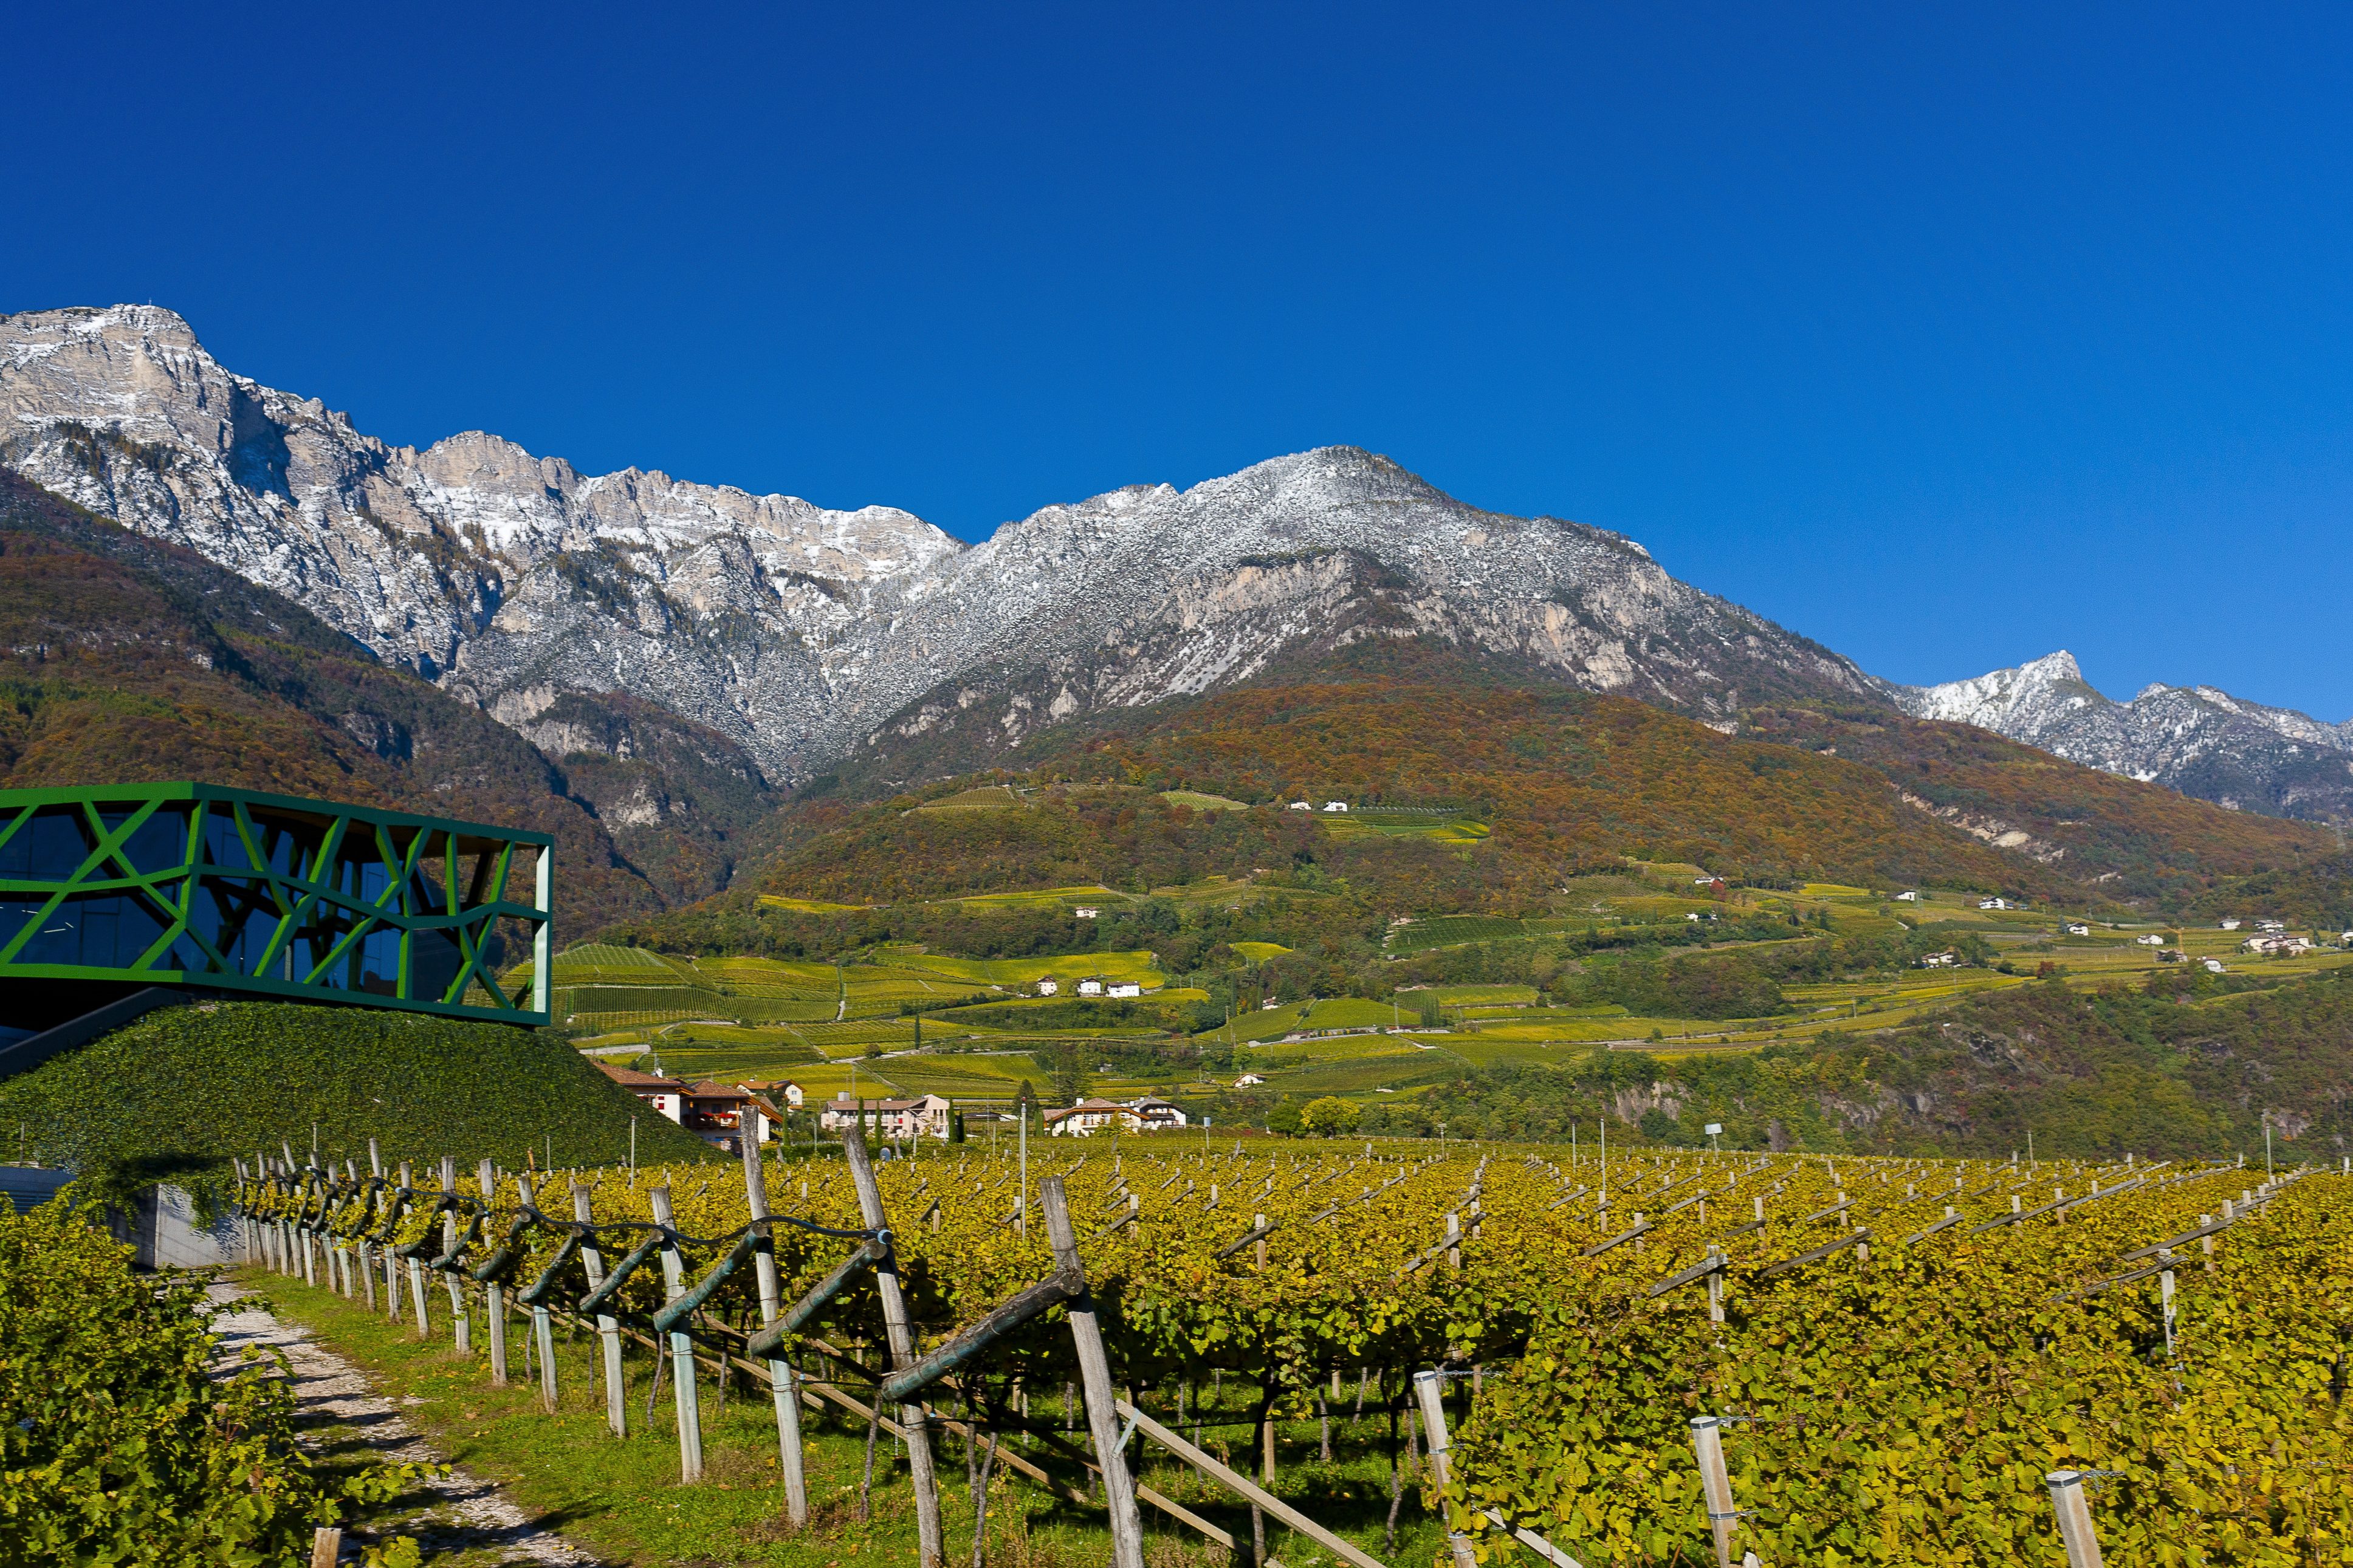 Cantina Tramin - Mountains overlooking the vineyards